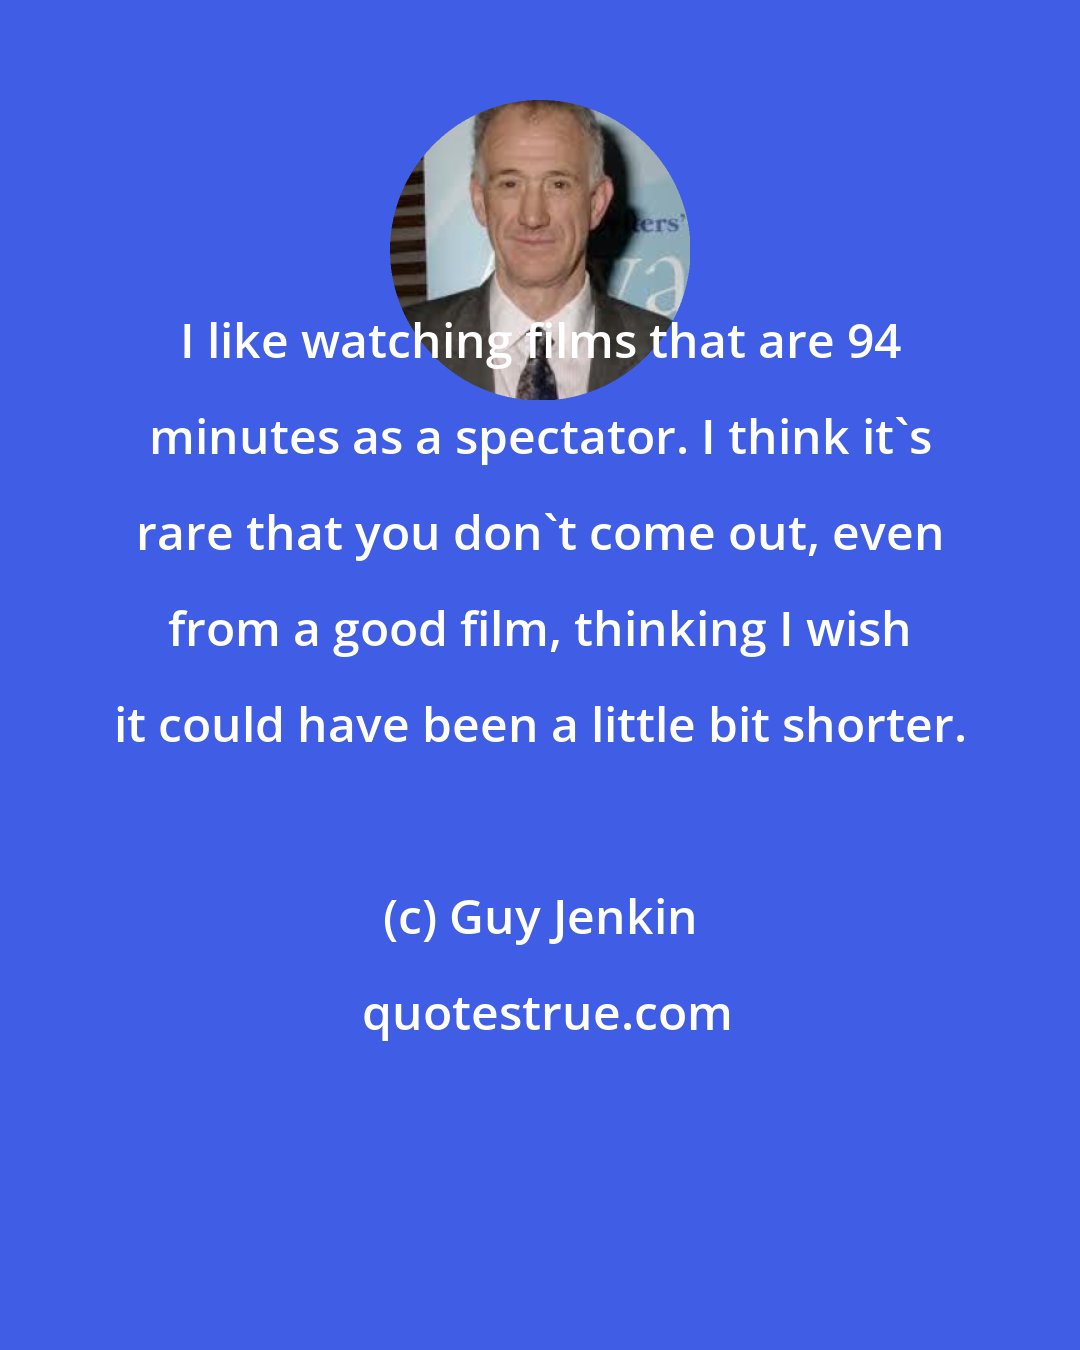 Guy Jenkin: I like watching films that are 94 minutes as a spectator. I think it's rare that you don't come out, even from a good film, thinking I wish it could have been a little bit shorter.